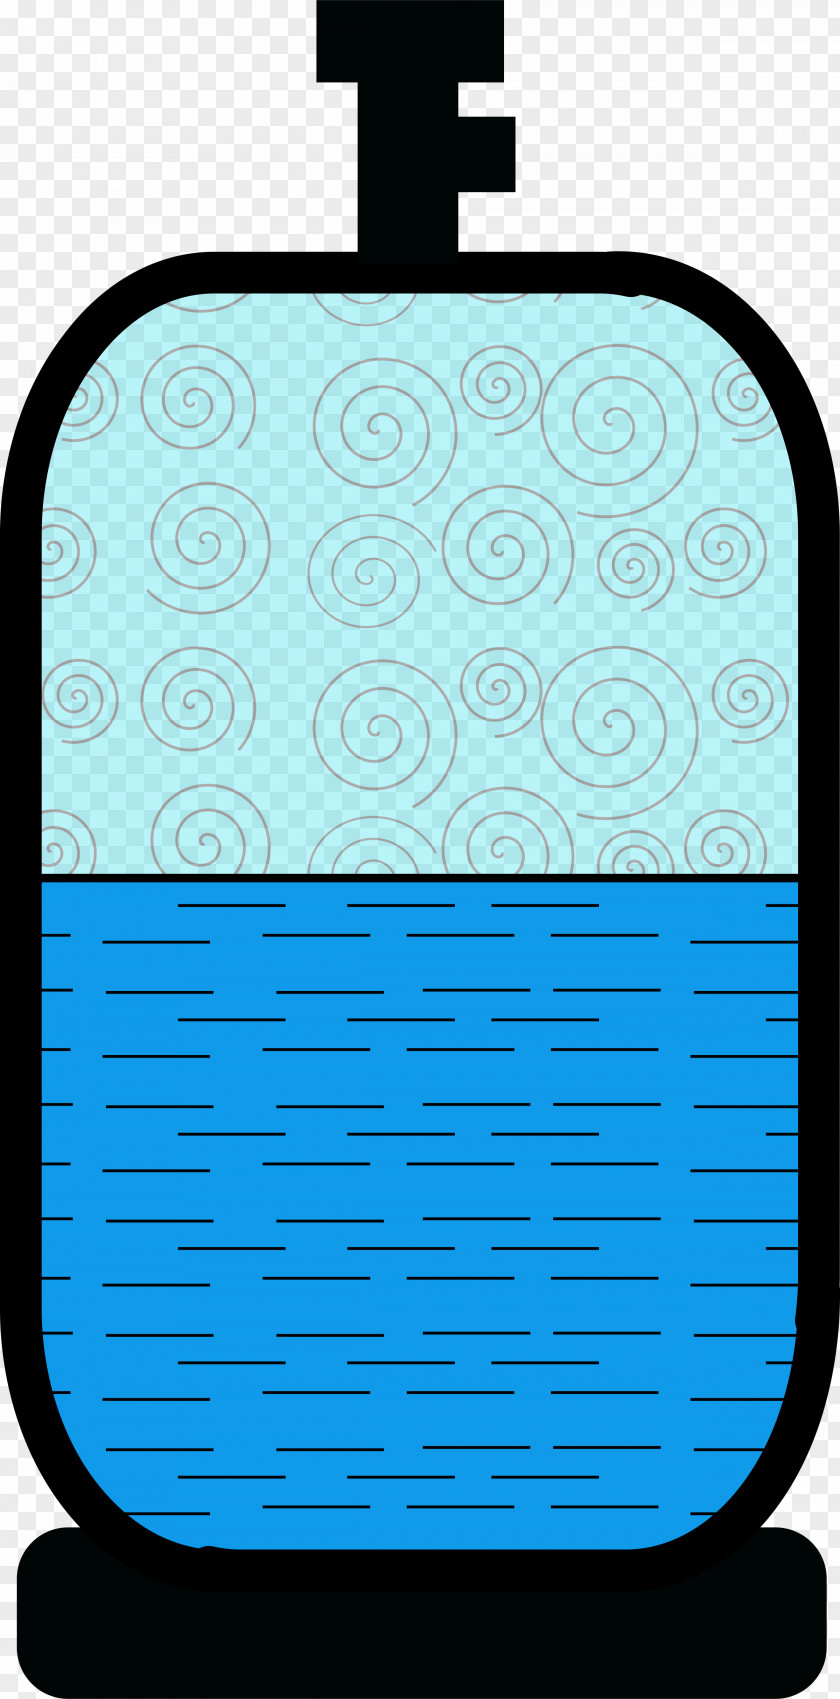 Gas Cylinder Teilchenmodell Clip Art PNG